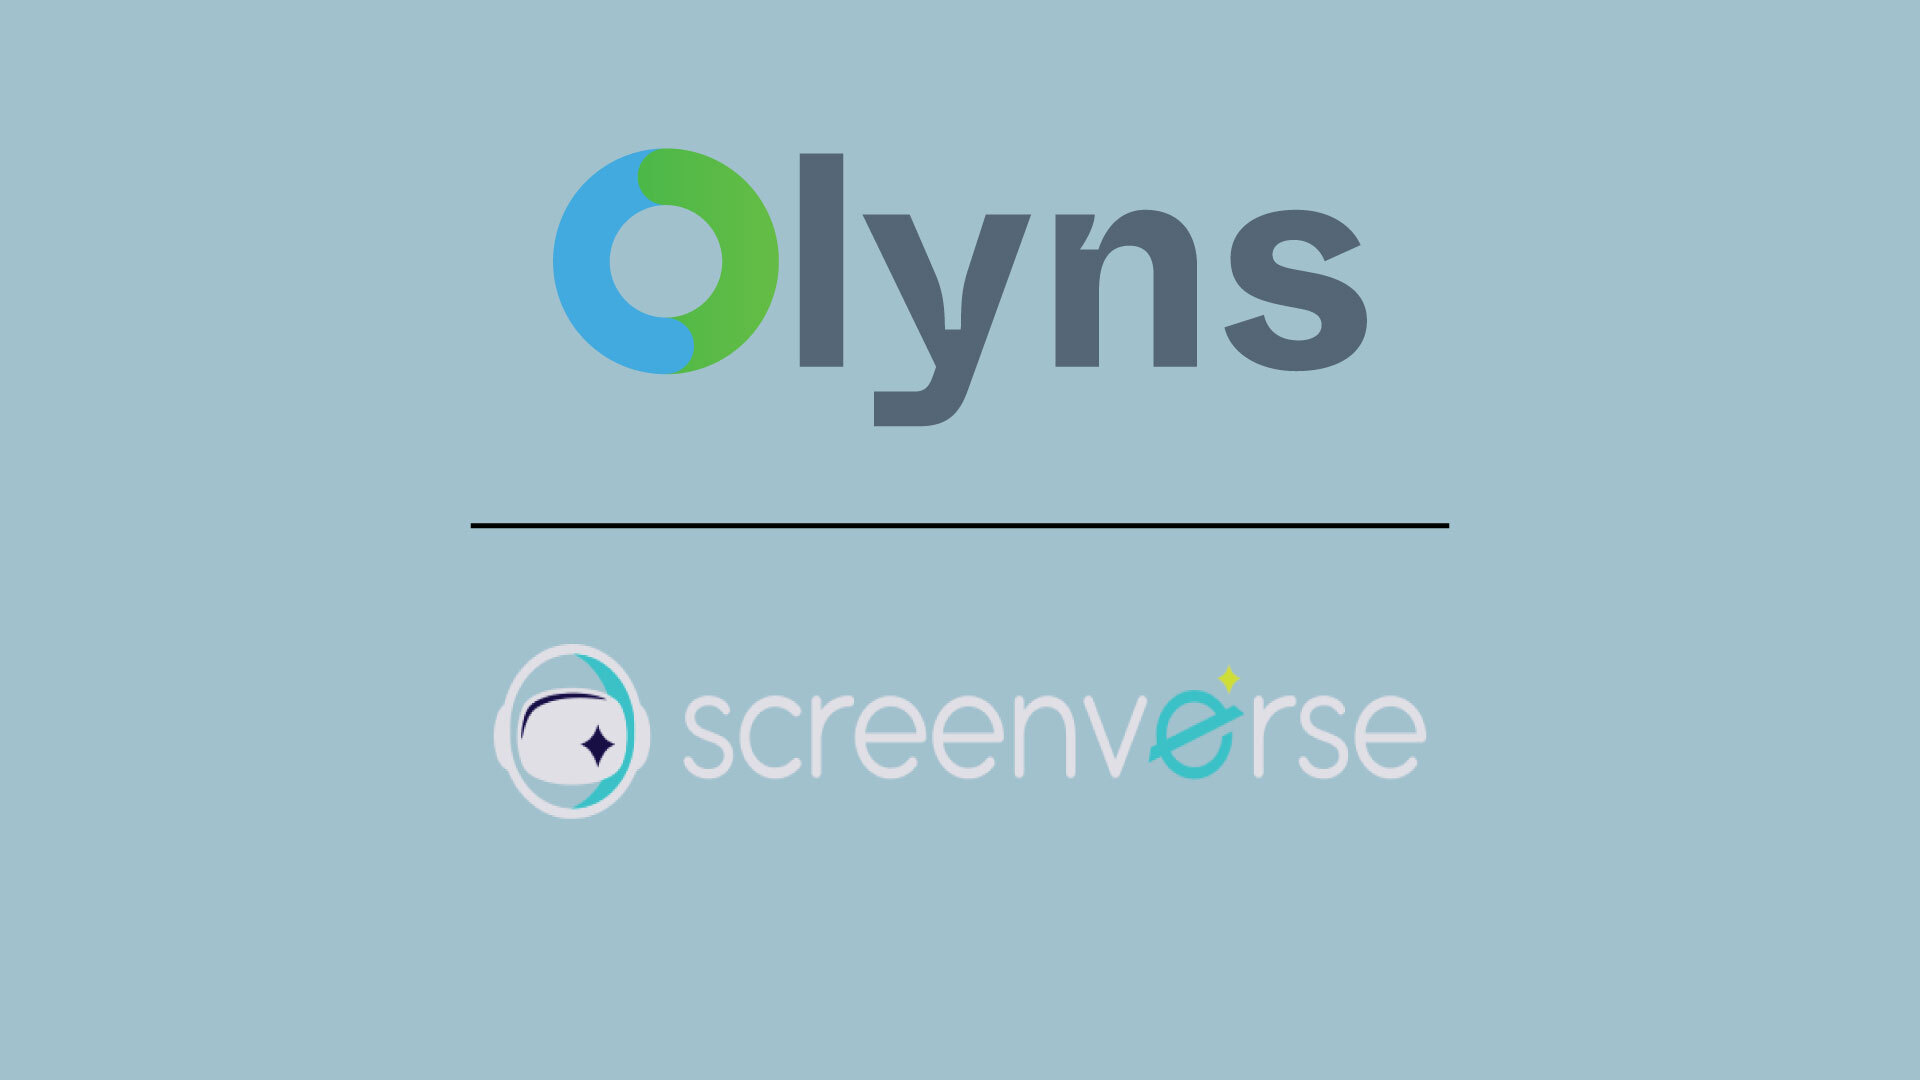 Olyns partners with Screenverse to Sell its Digital Out-of-Home Network on Programmatic Platforms